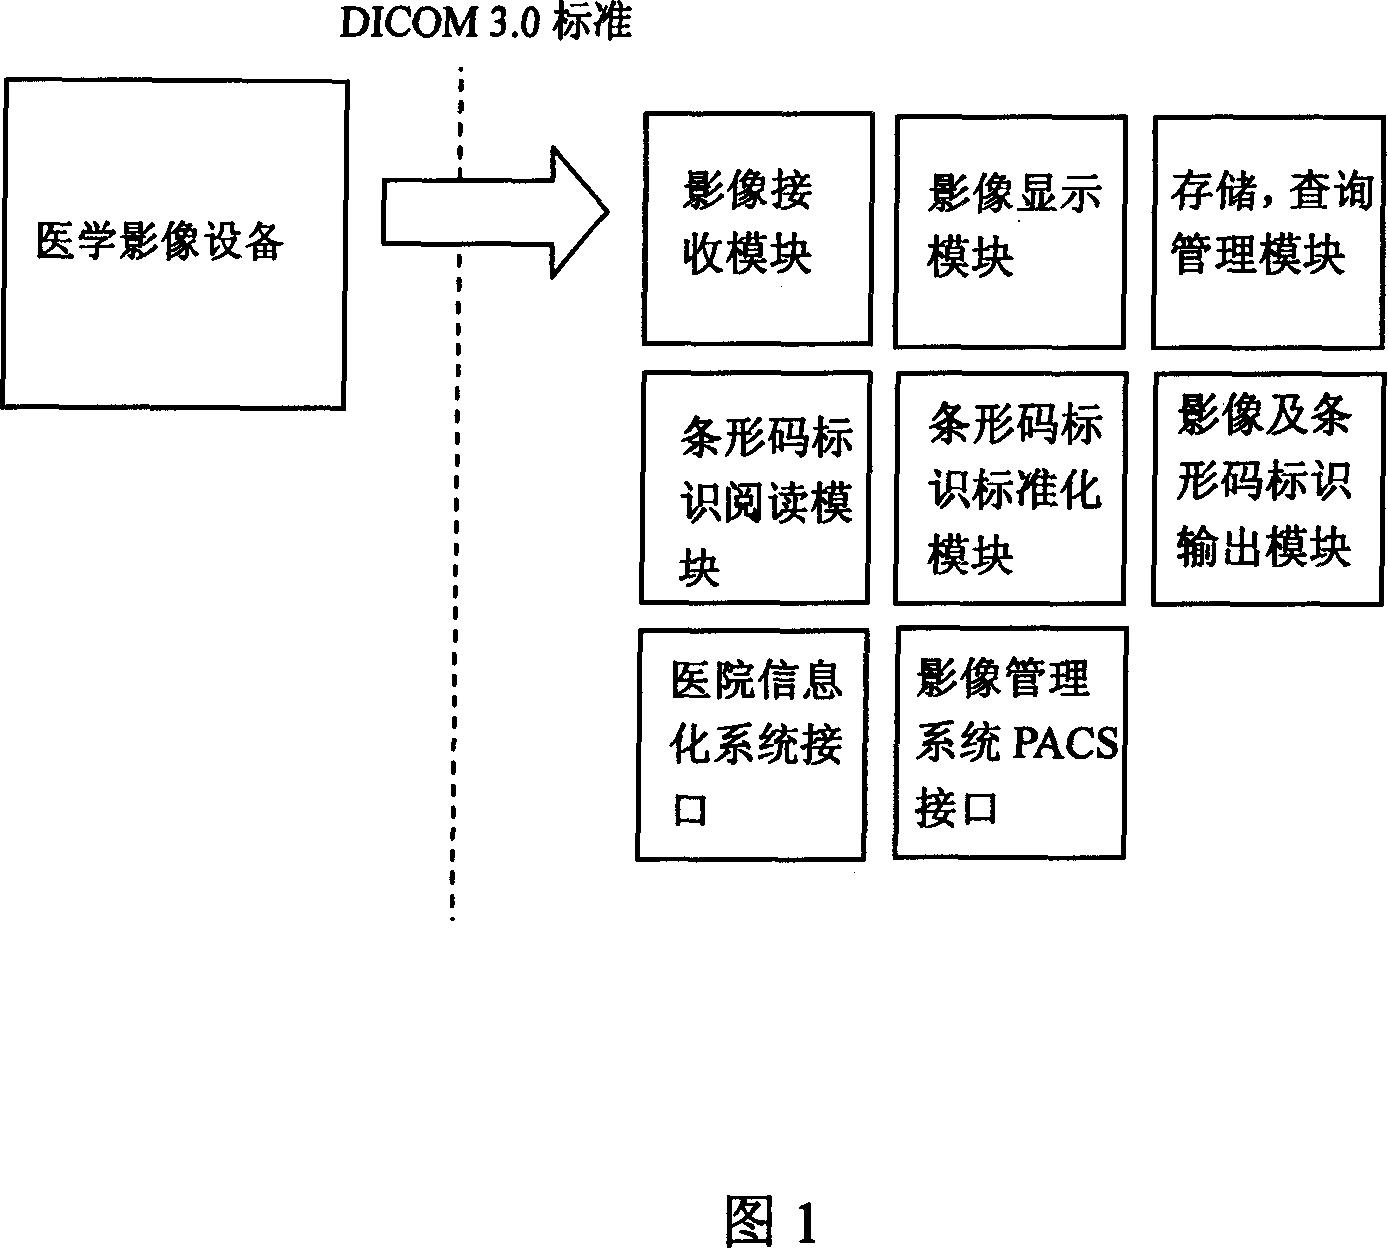 Management method of biological material products transplanted into physical body